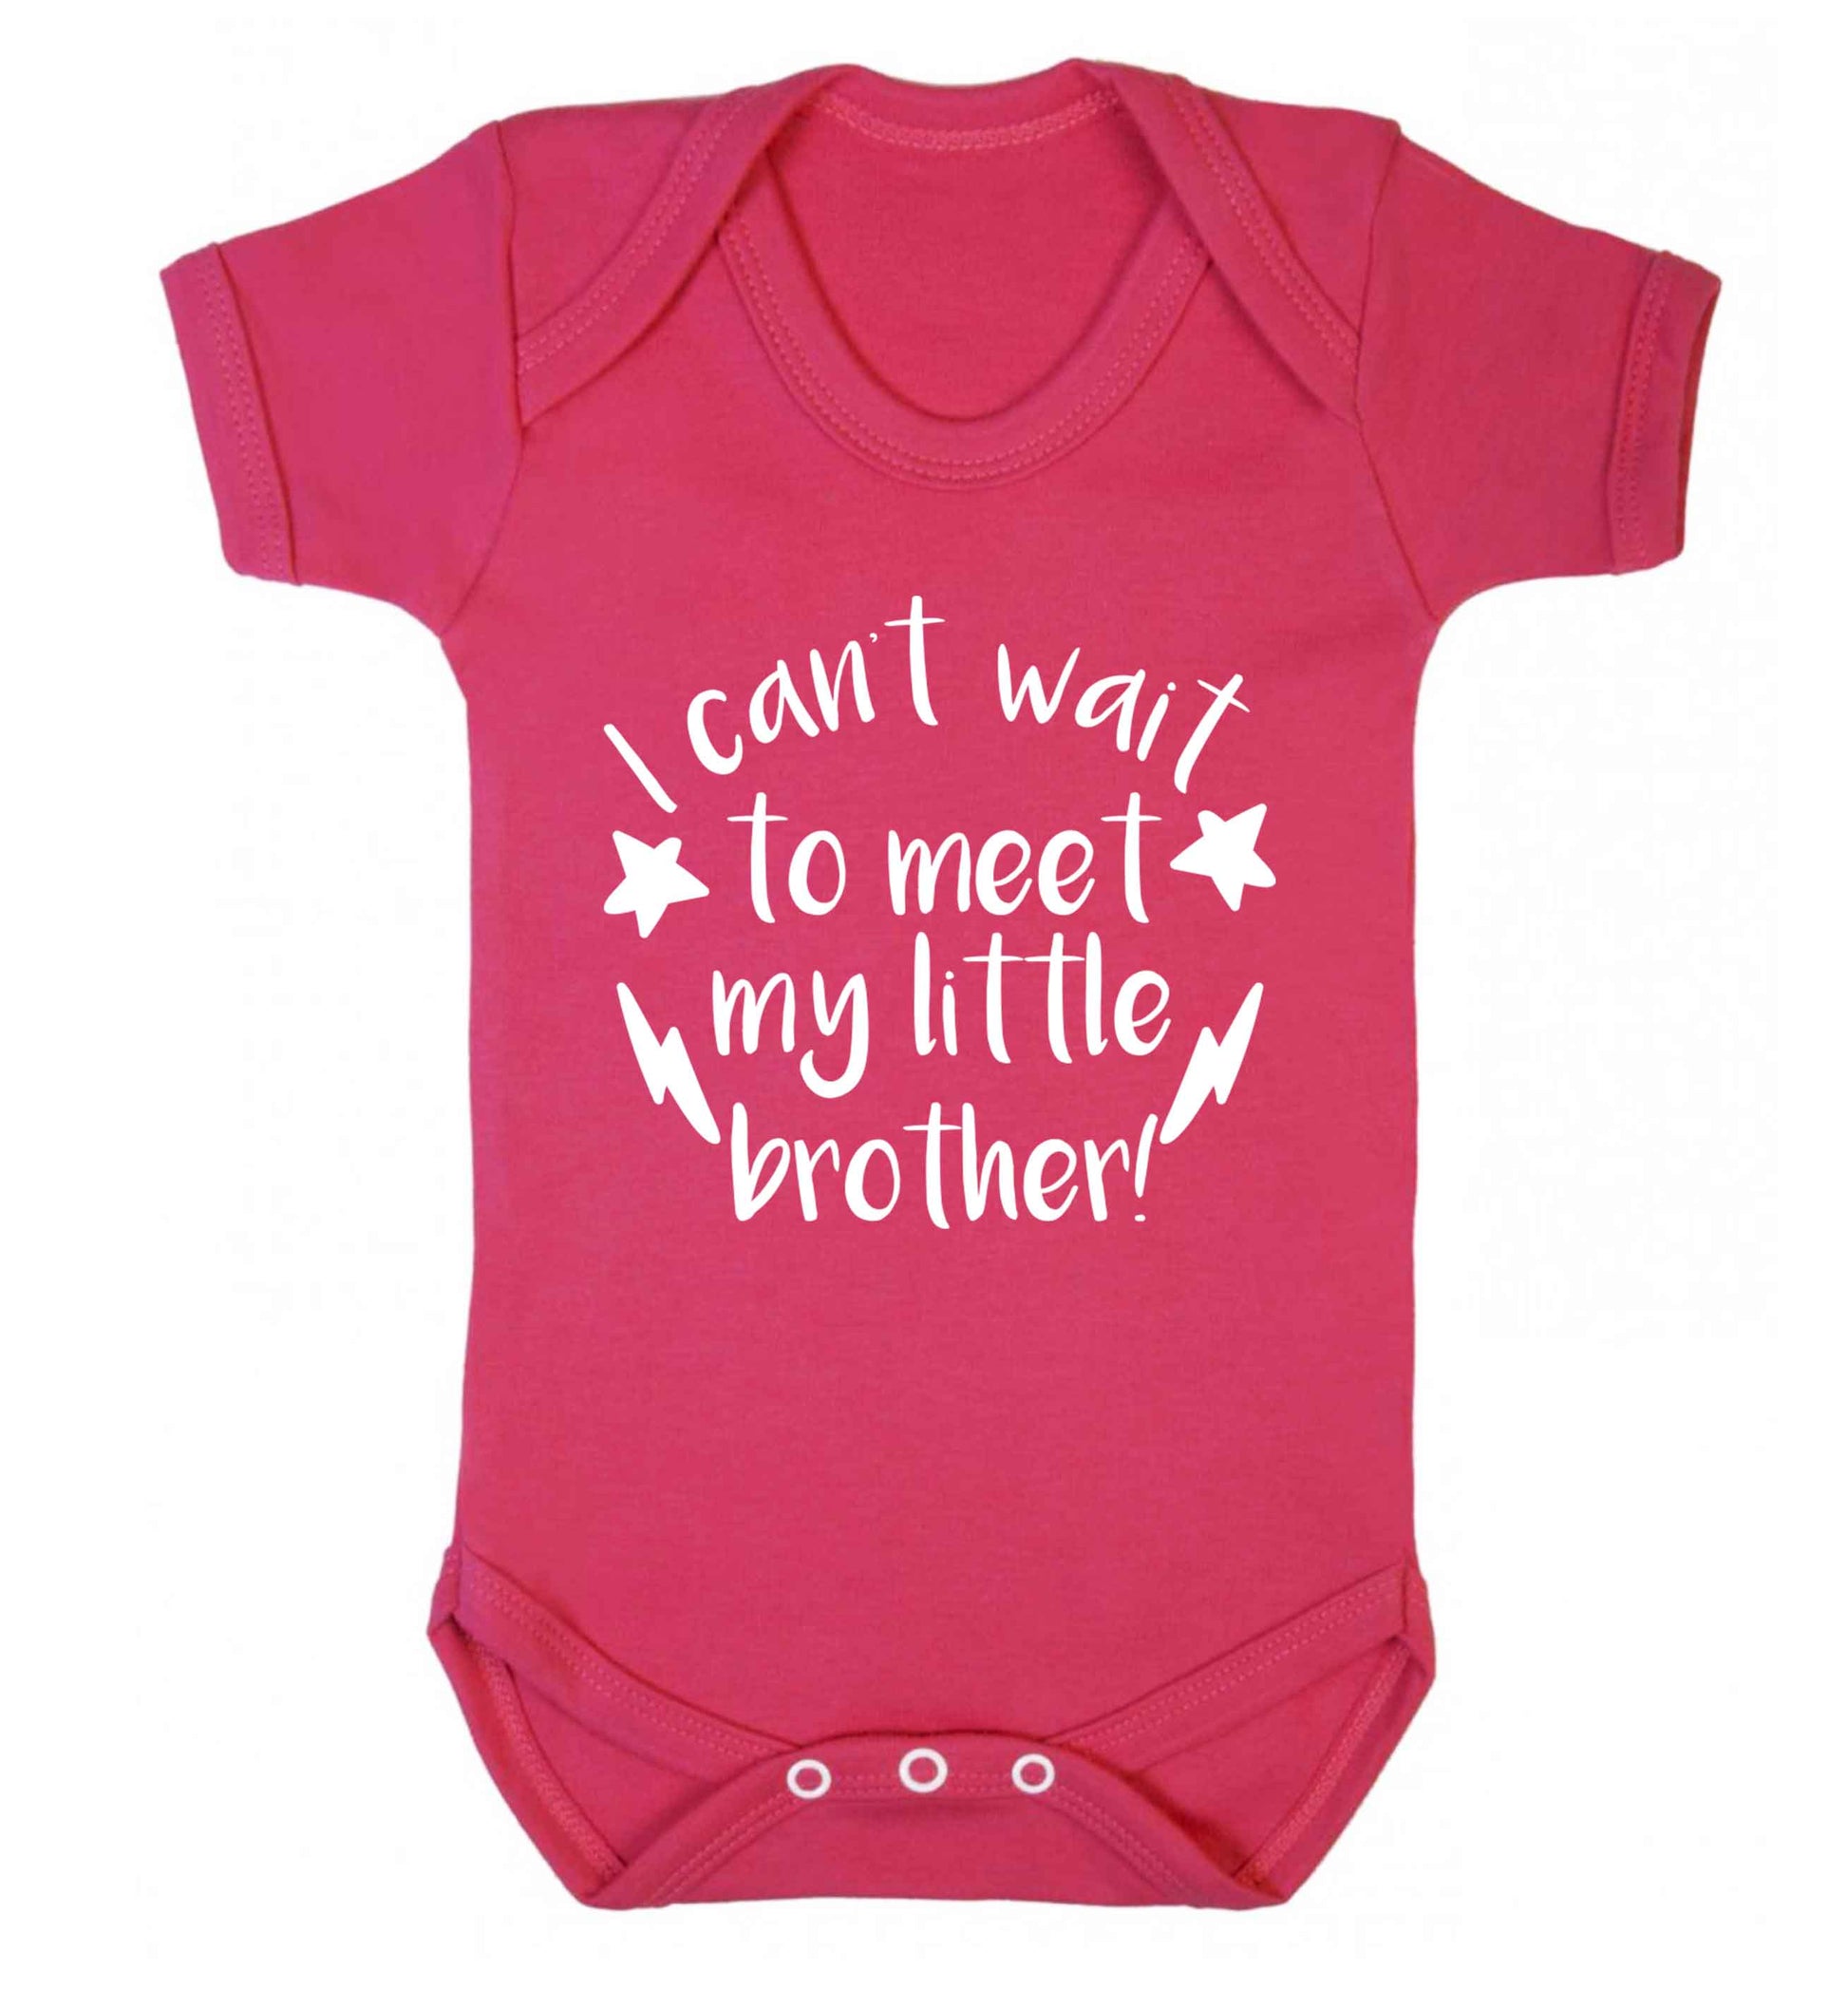 I can't wait to meet my sister! Baby Vest dark pink 18-24 months